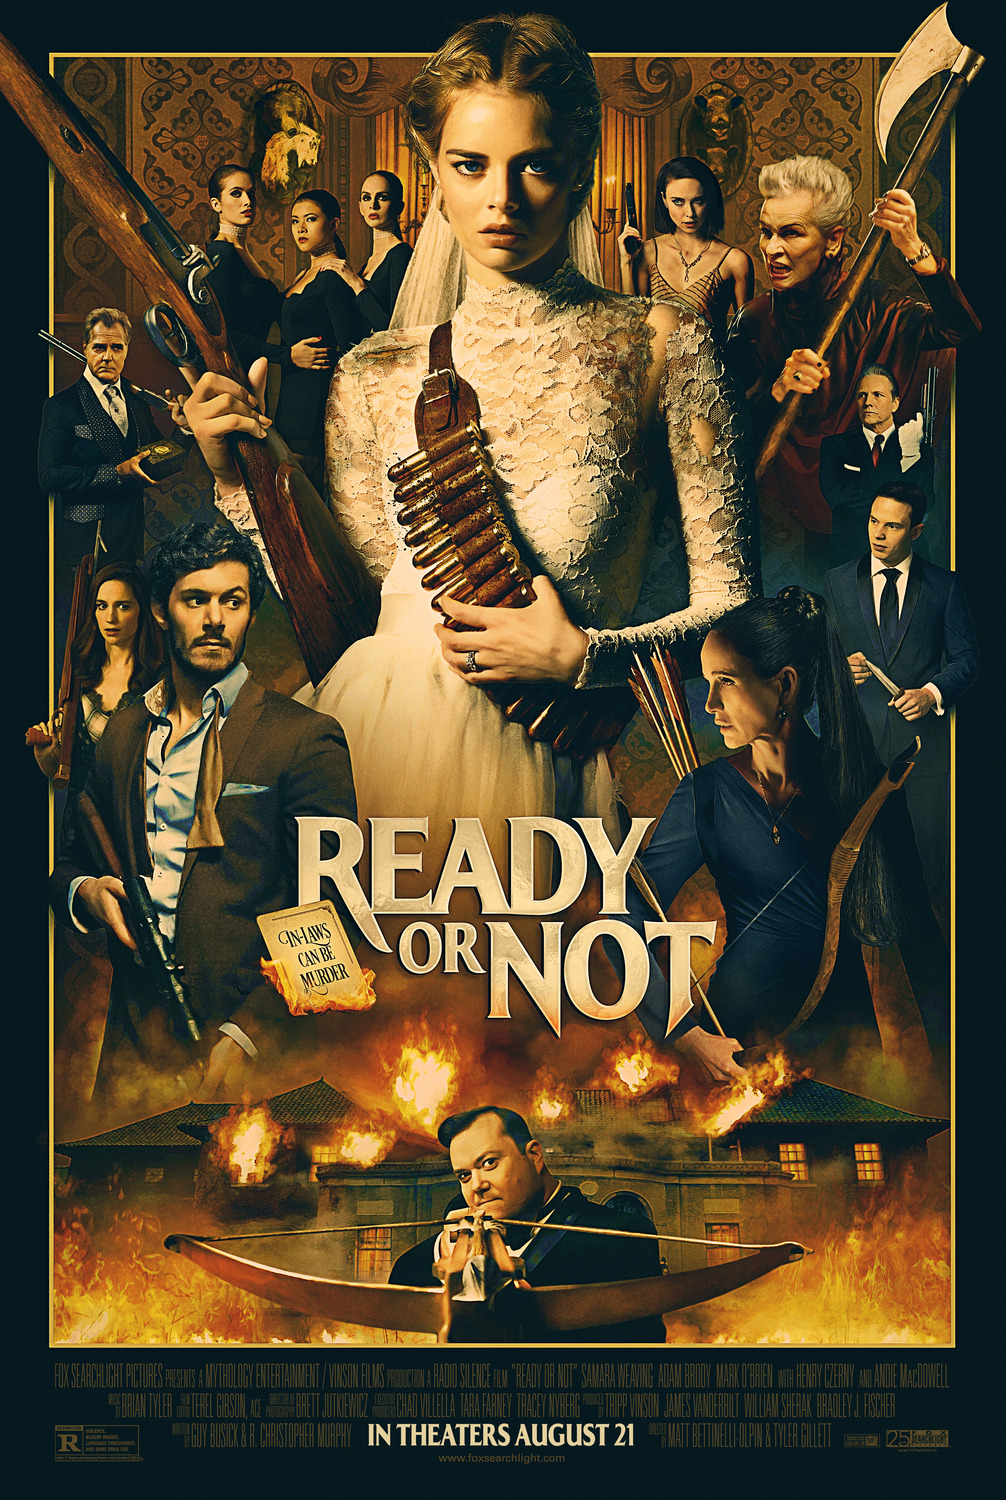 Ready Or Not film review: one of the best genre crowd-pleasers of the year